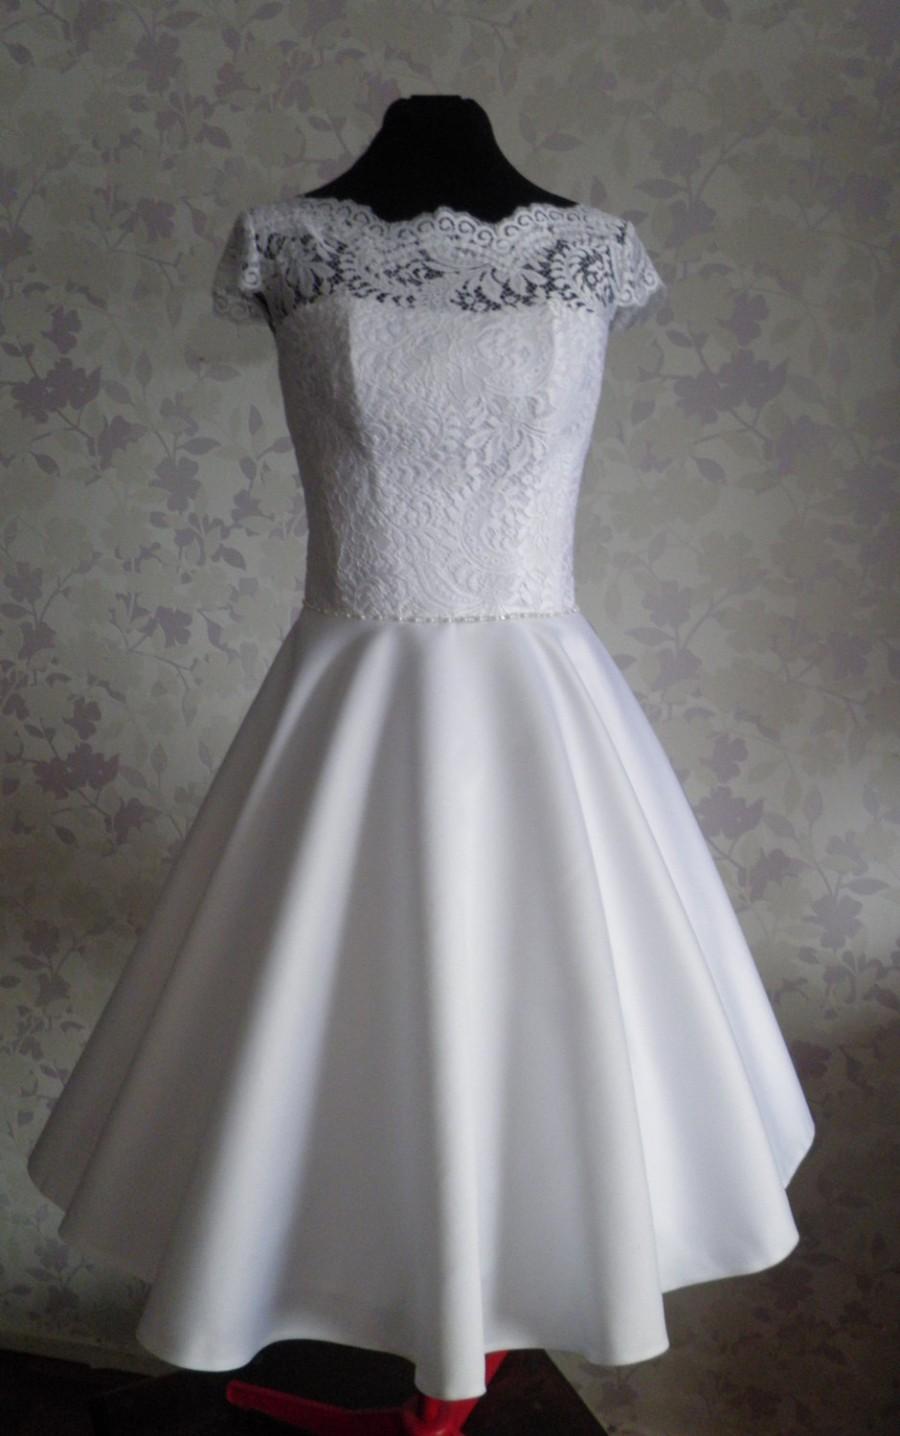 Mariage - Vintage Inspired Wedding Dress in style of Audrey Hepburn 1950 with Tea Length Skirt, Illusion Neckline, Lace Corset, V Shaped Back Cutout